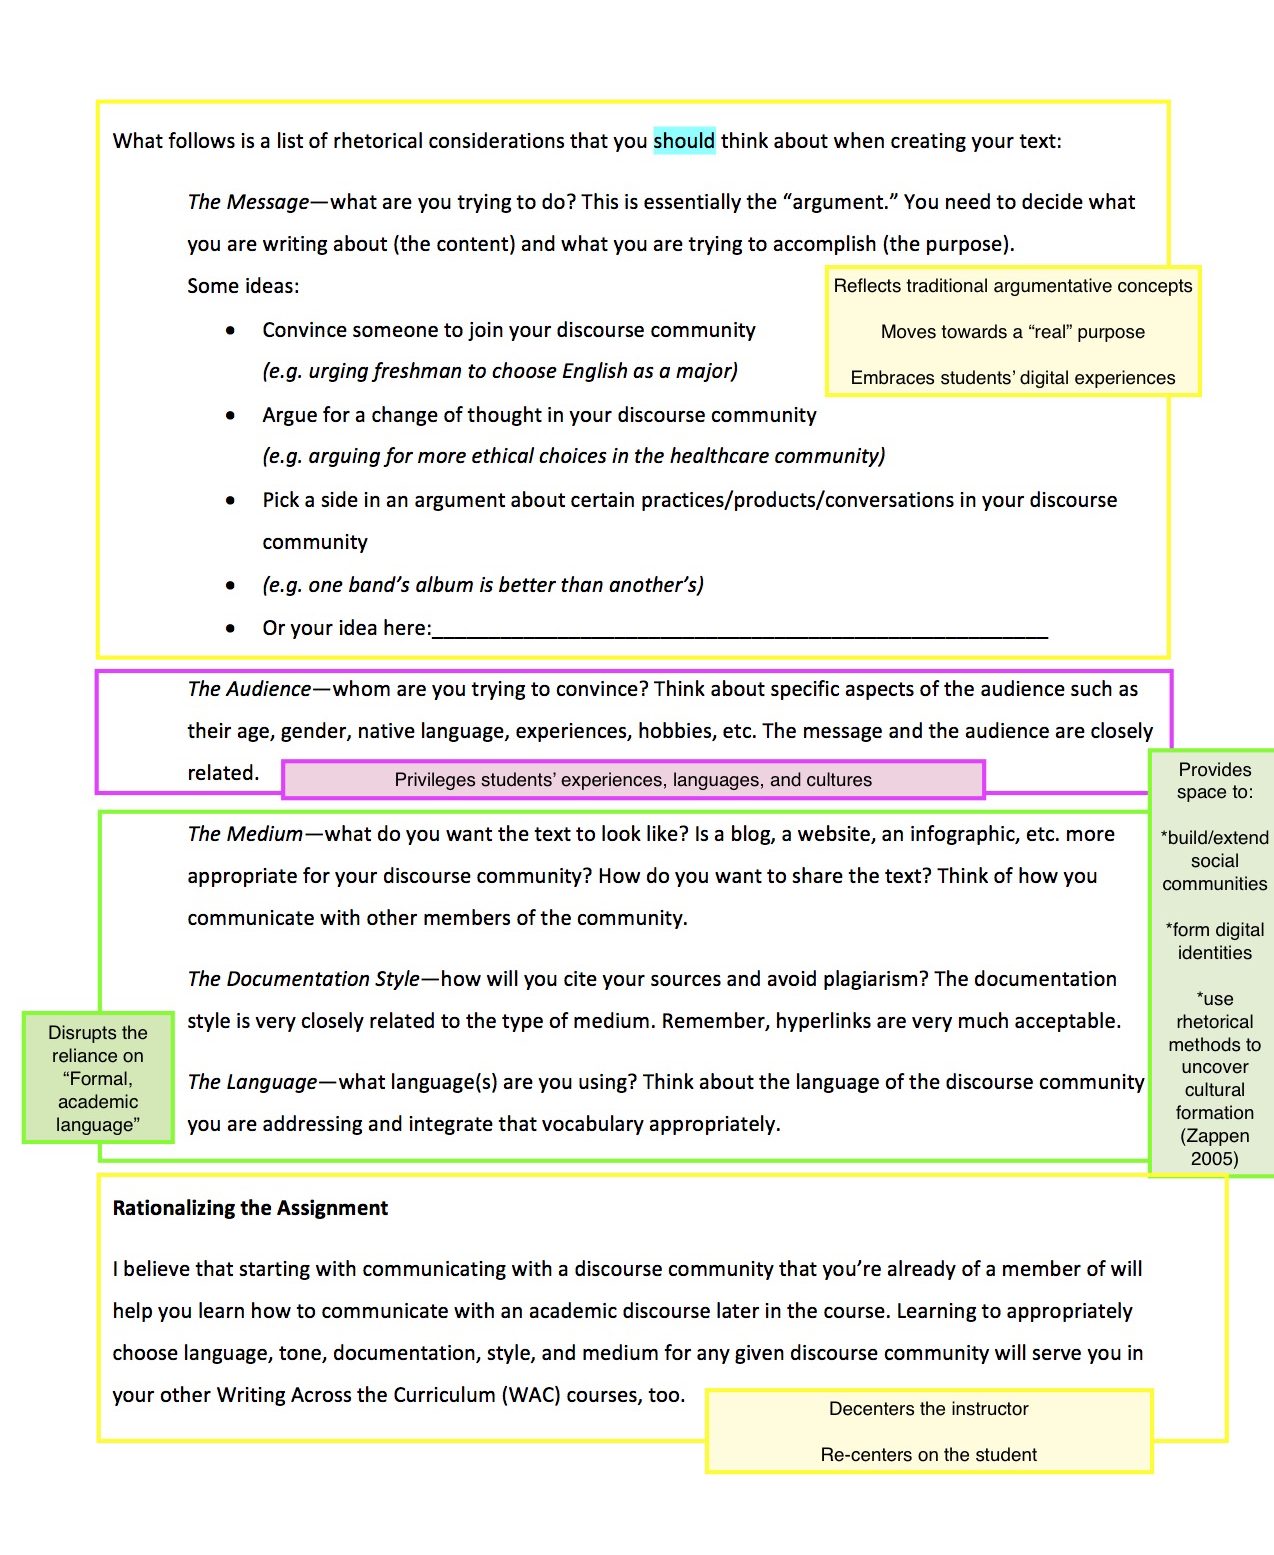 Third page: rhetorical considerations. Markup highlights the student-centered framing.